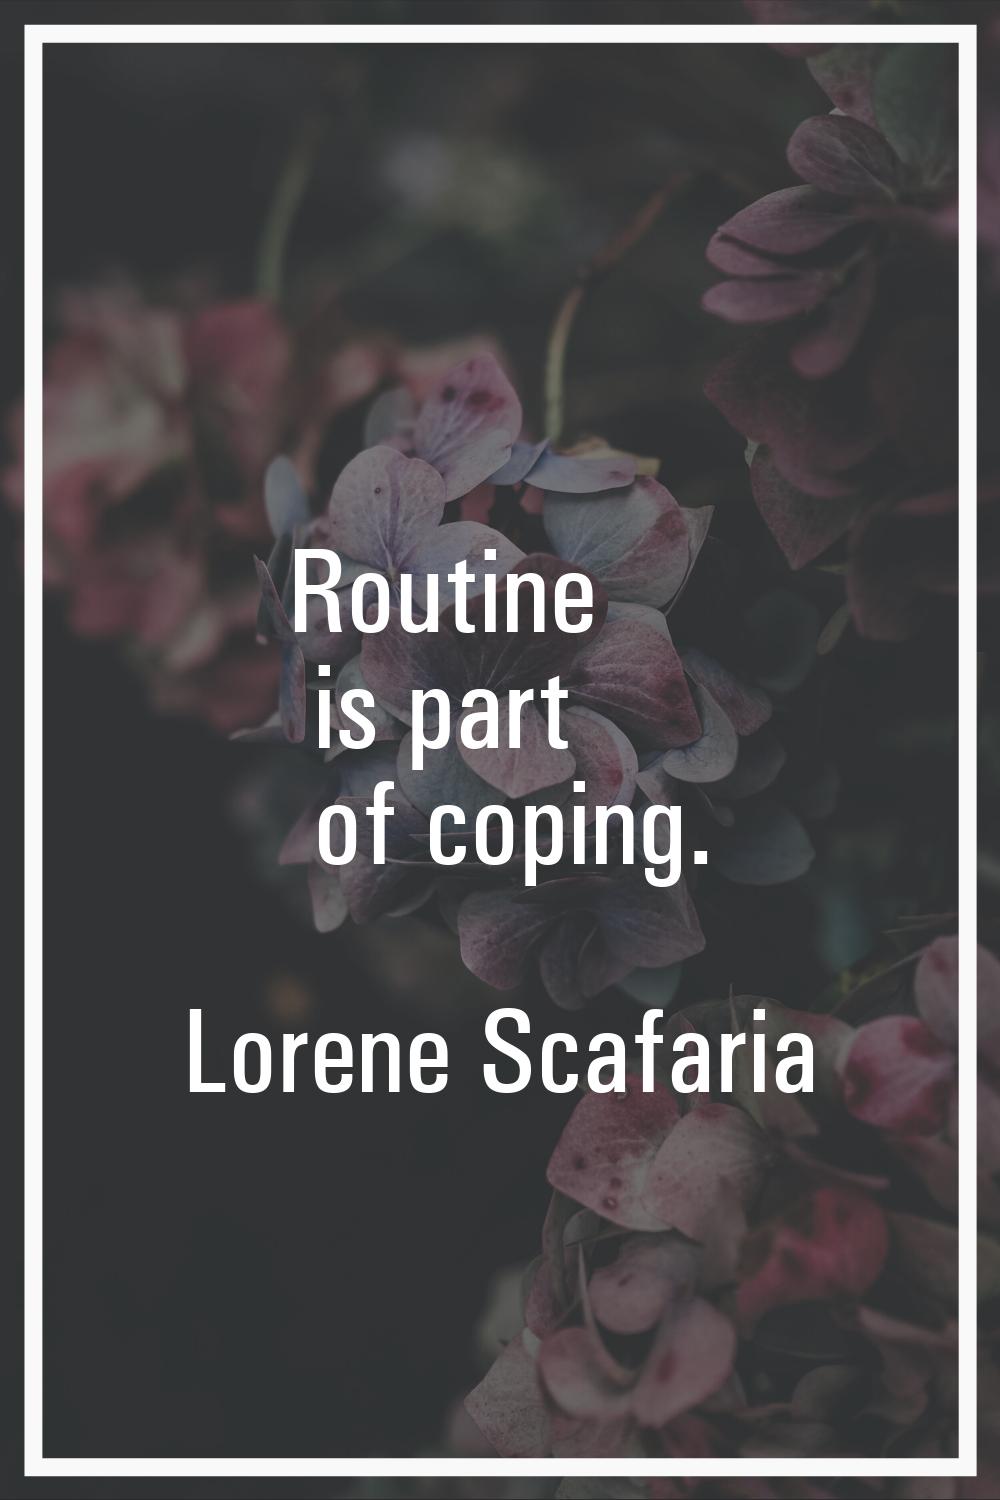 Routine is part of coping.